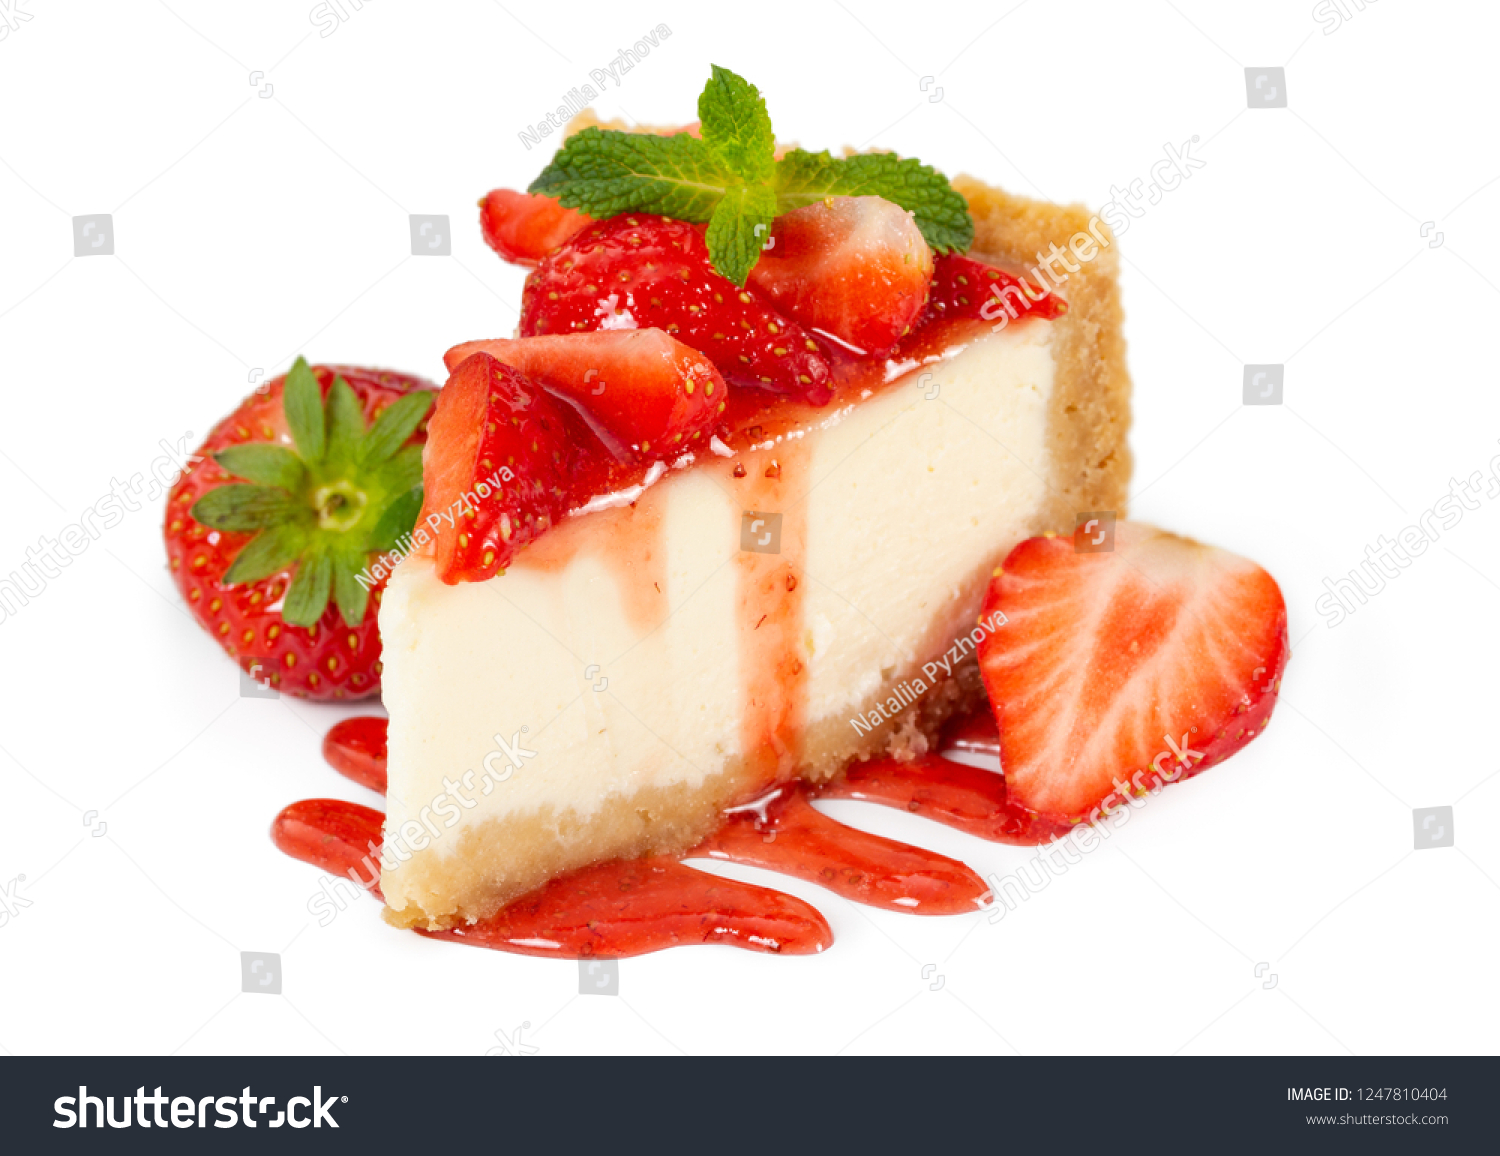 Piece of cheesecake with fresh strawberries and mint isolated on white background #1247810404